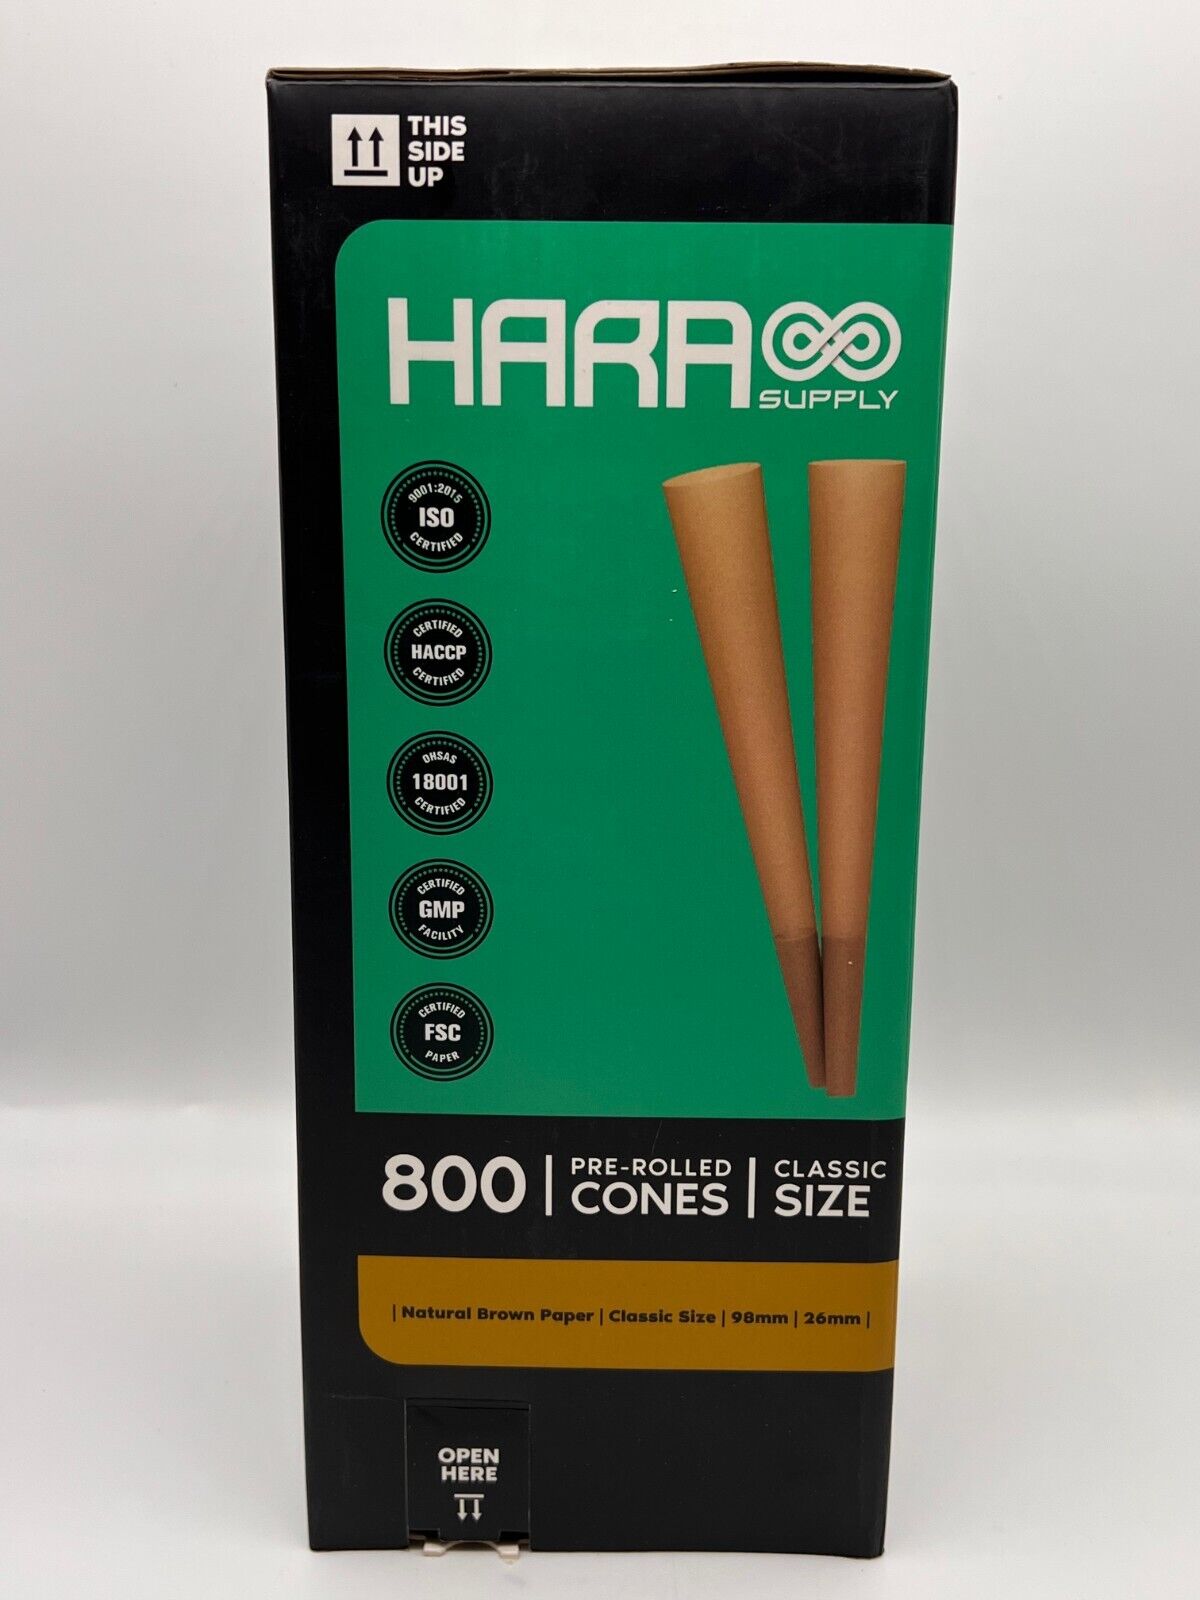 HARA SUPPLY Natural Brown Paper Classic Size 98mm 800 Pre-Rolled Cones Filtered